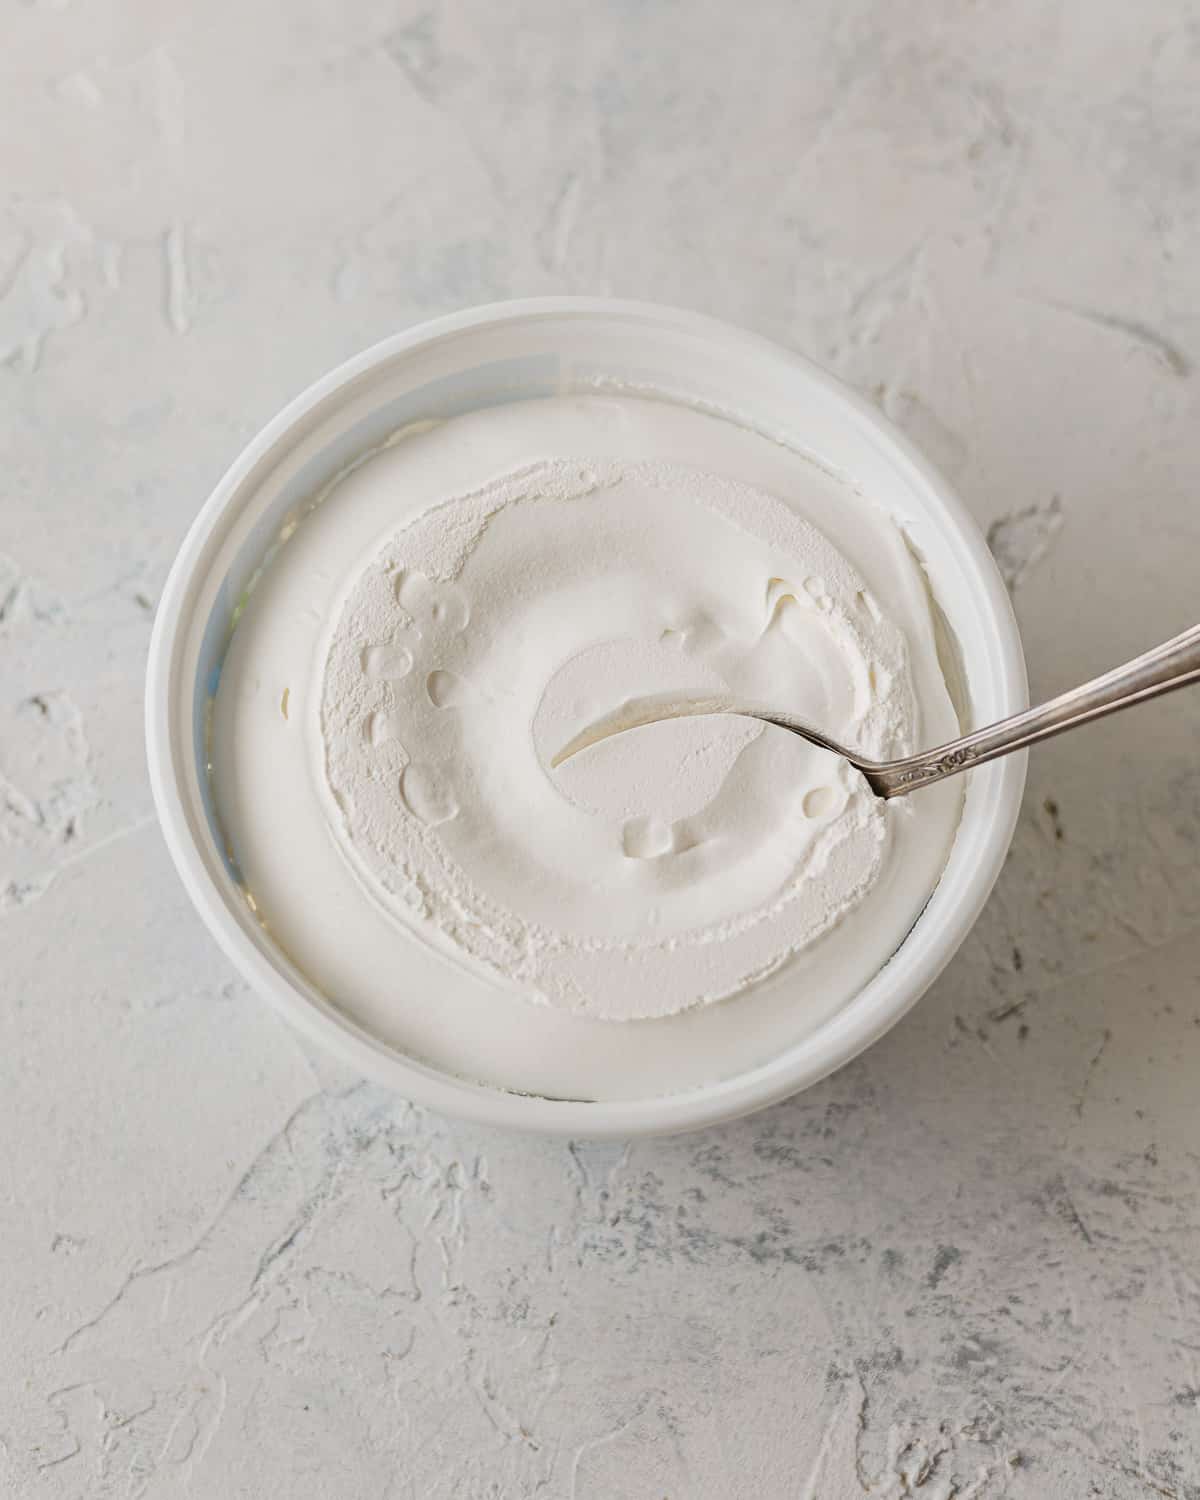 An open container of whipped topping with a spoon in it.